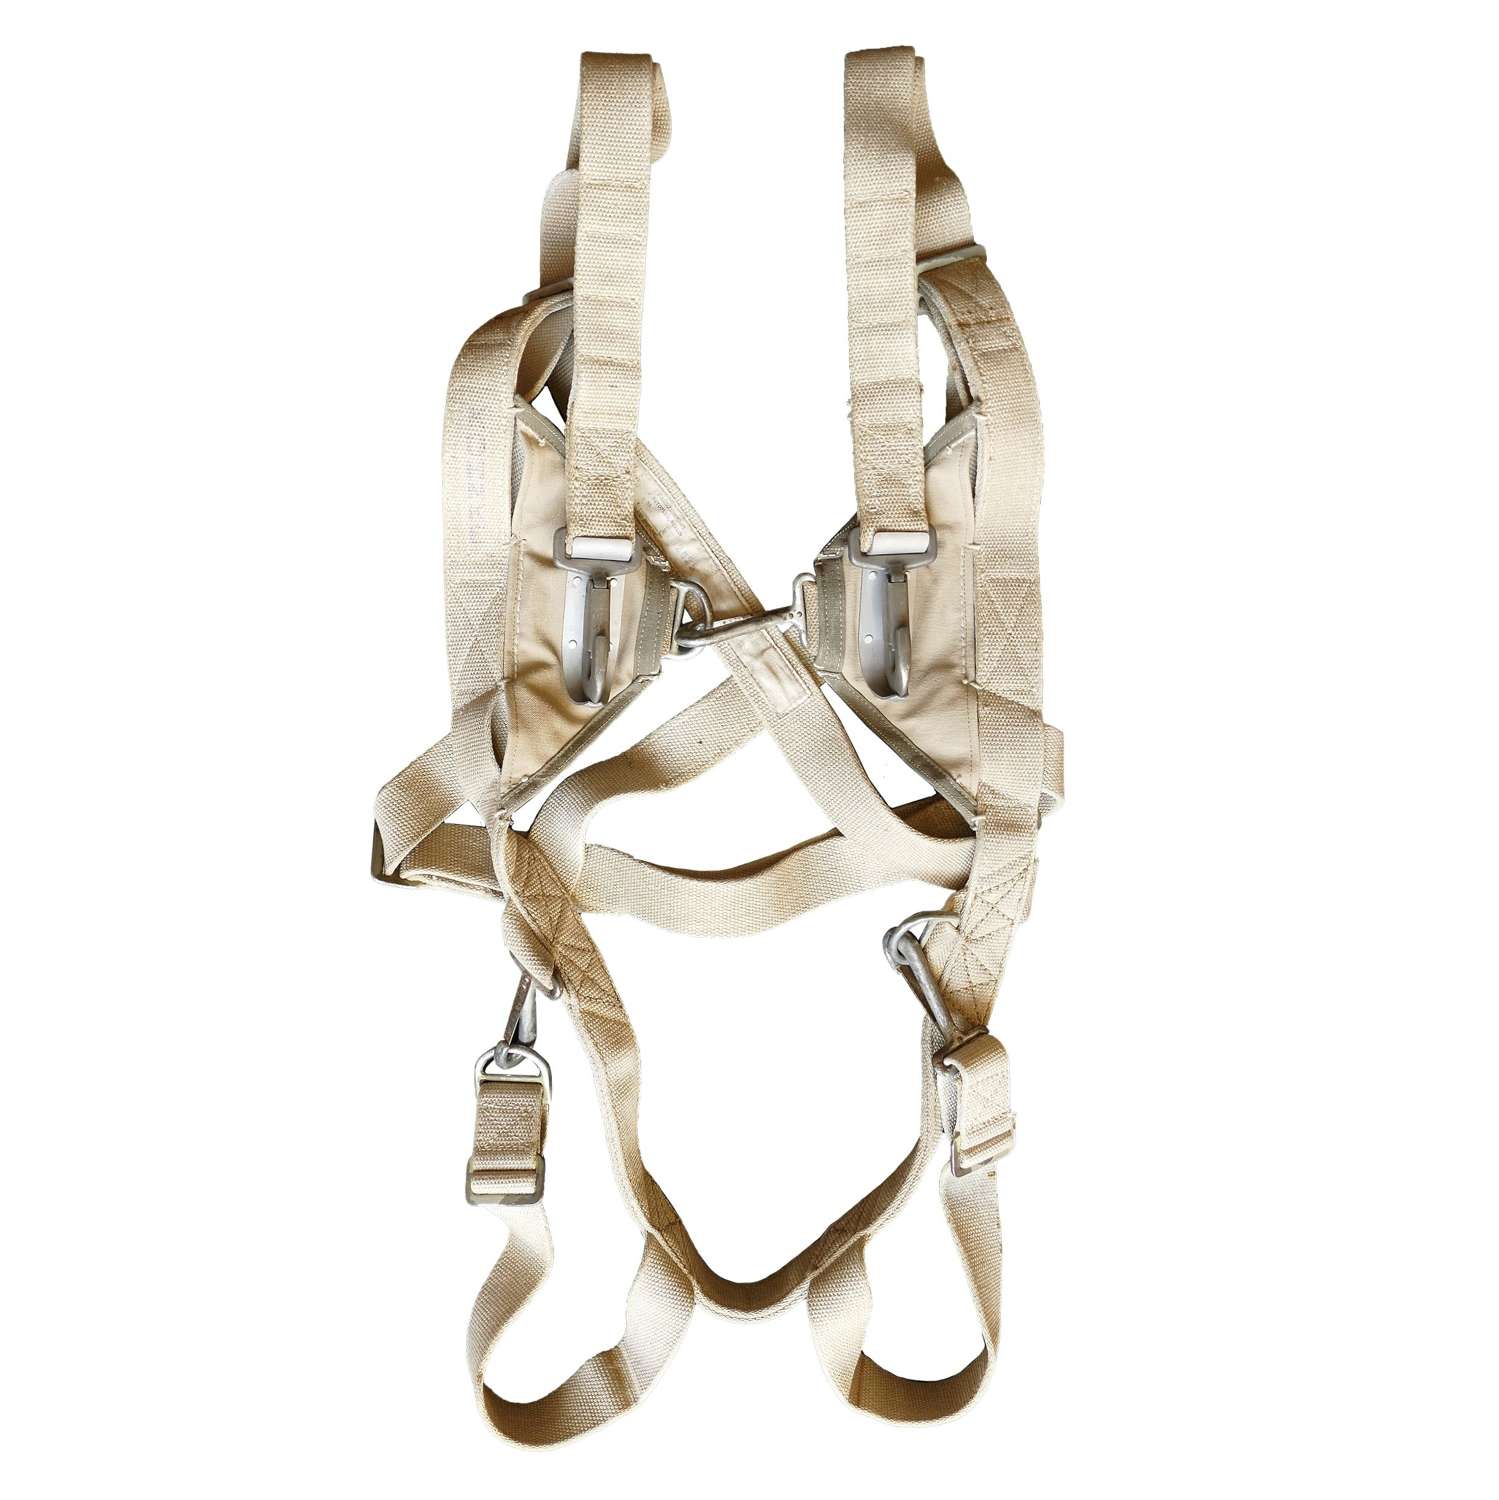 Luftwaffe chest type parachute harness - early